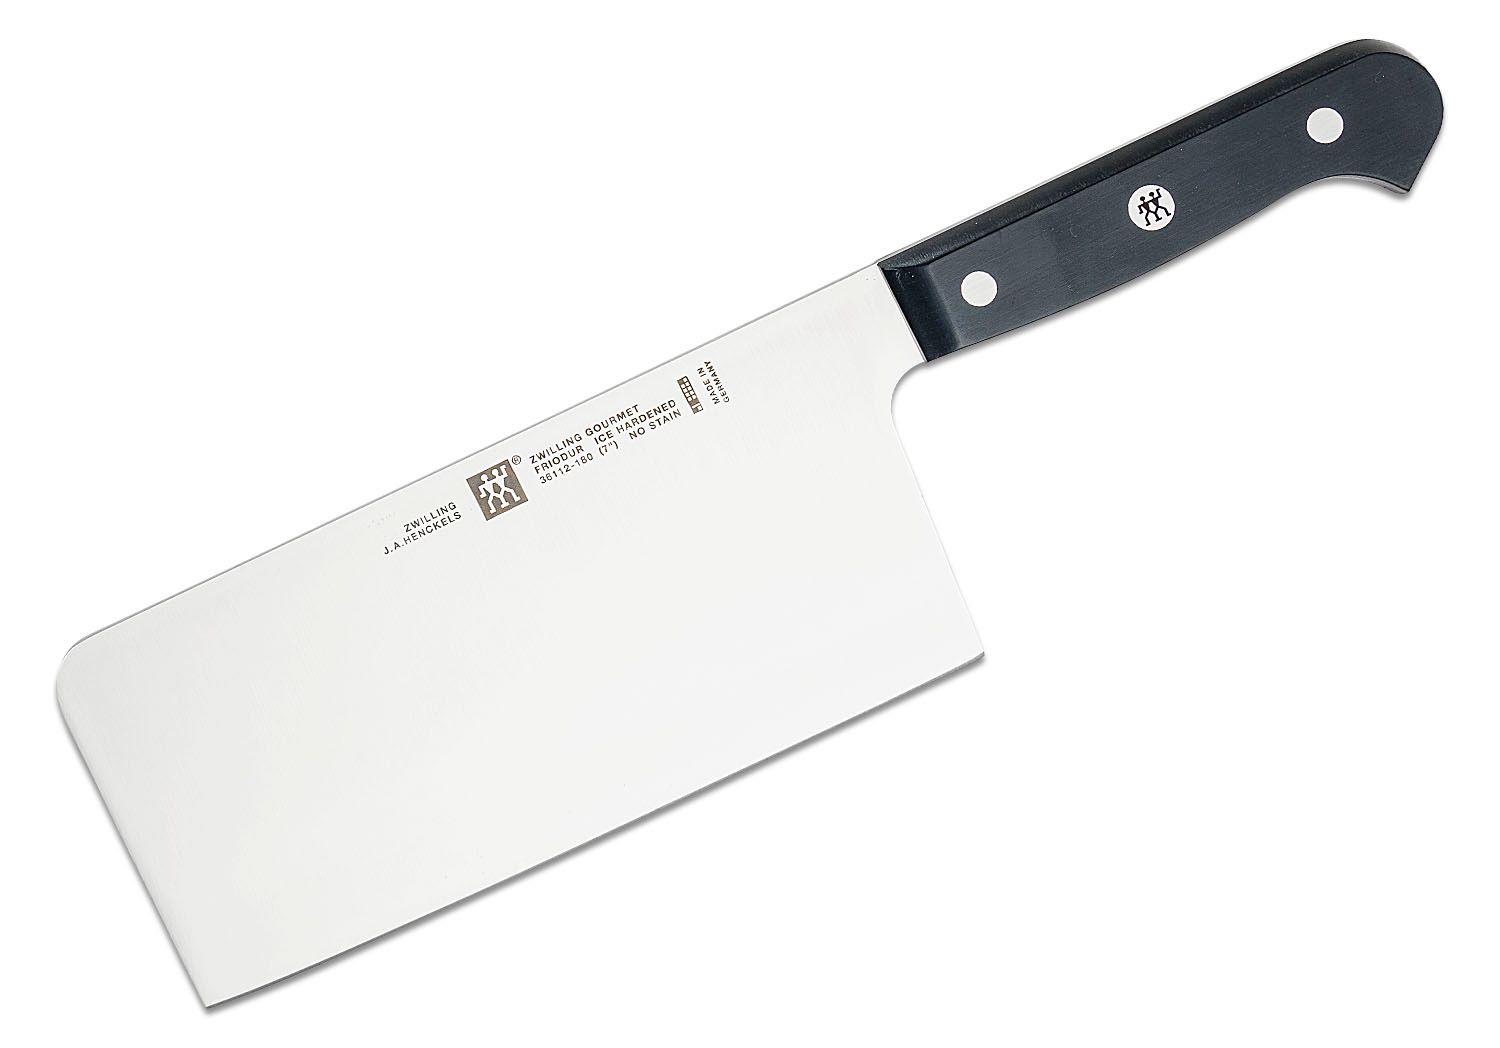 ZWILLING J.A. Henckels Pro 7 Chinese Chef's Knife & Vegetable